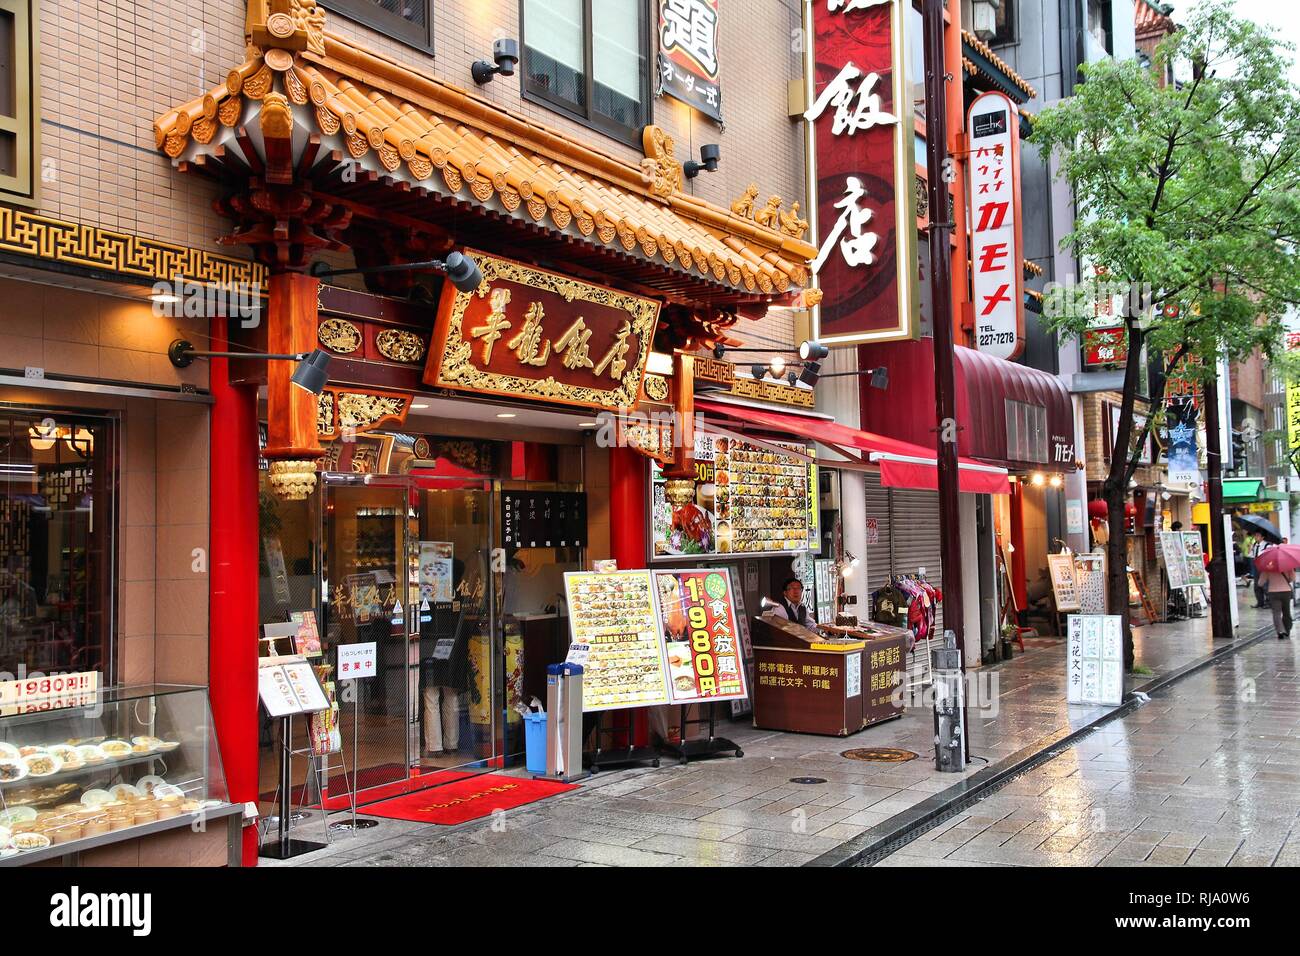 YOKOHAMA, JAPAN - MAY 10: People walk past Chinese restaurant in Chinatown on May 10, 2012 in Yokohama, Japan. Yokohama's Chinatown is the largest in  Stock Photo